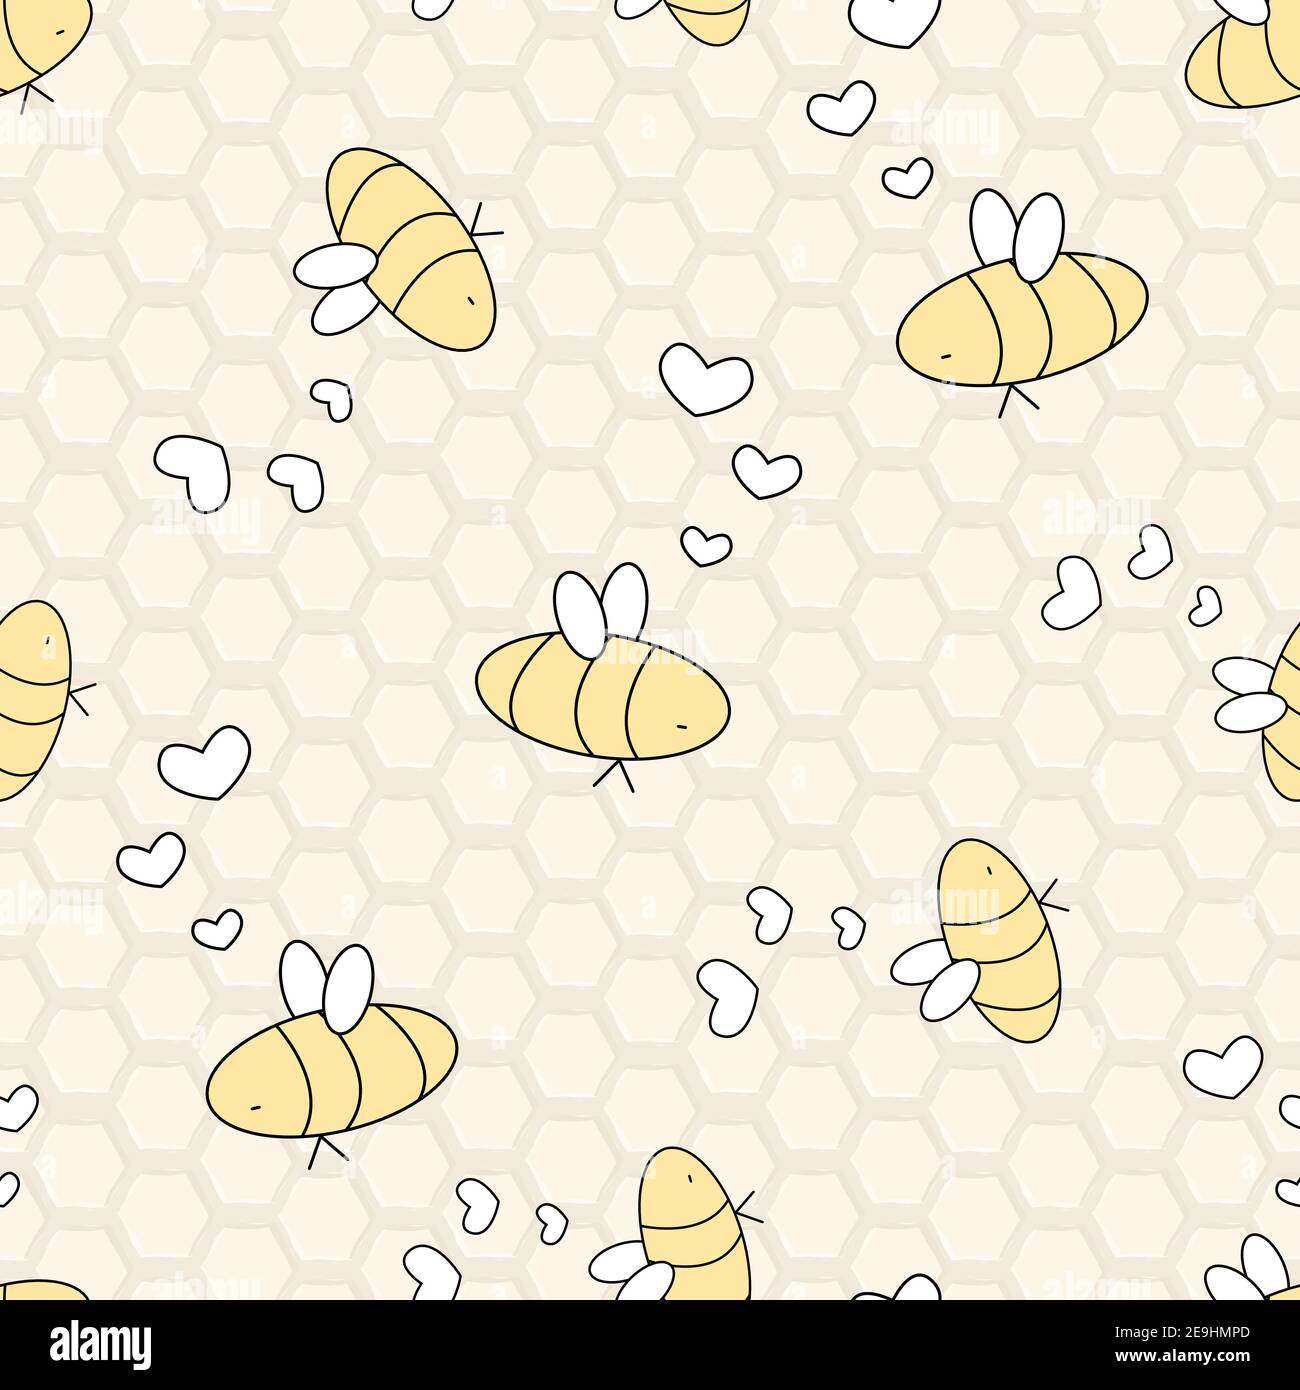 Yellow black white isolated insects. Bees are in love, hearts are near their heads are arranged in no particular order. Seamless repeat pattern on bro Stock Vector